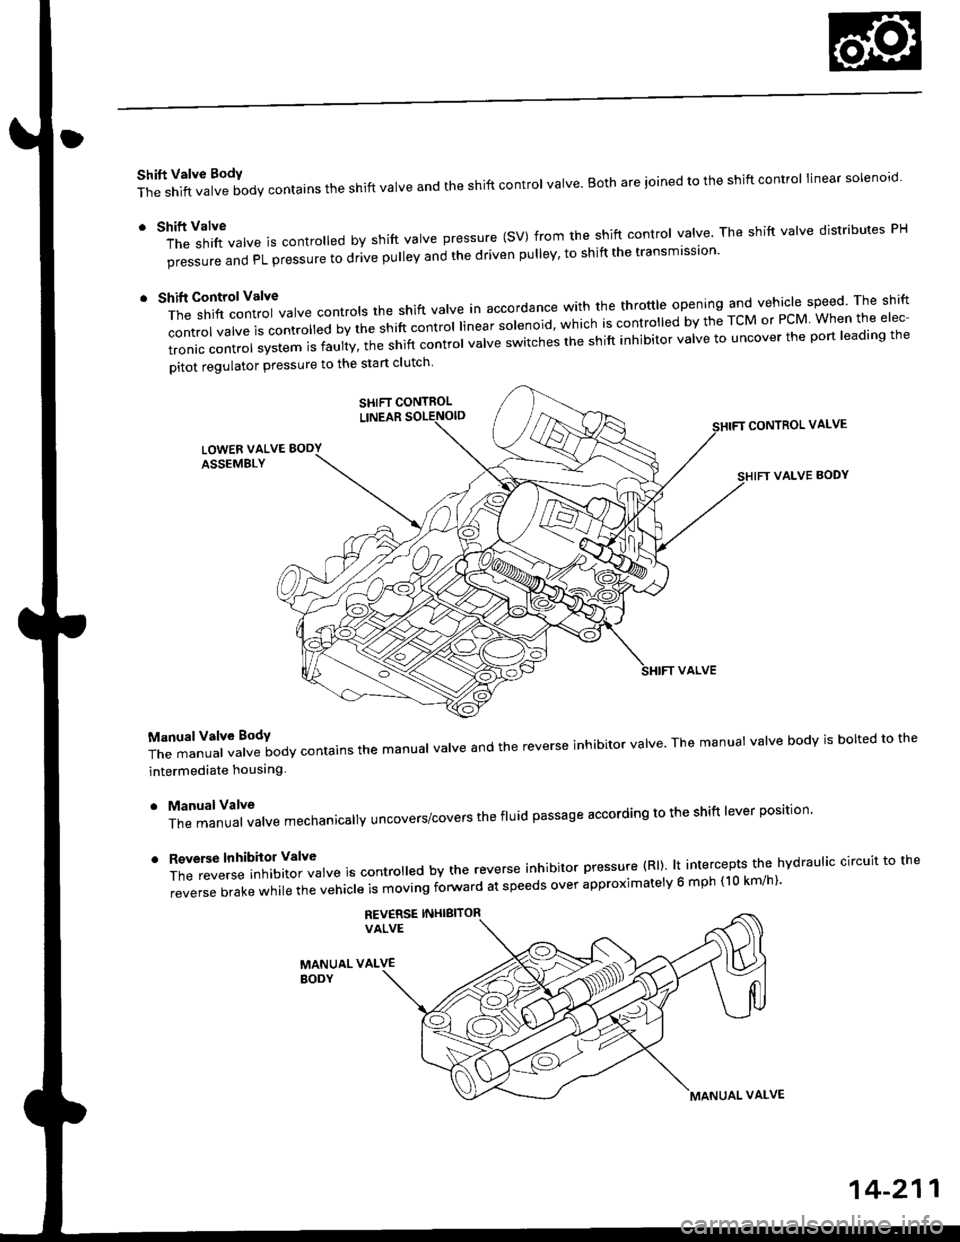 HONDA CIVIC 1996 6.G Workshop Manual Shift Valve BodY
The shift valve body contains the shift valve and the shift control valve. Both are ioined to the shift control linear solenoro.
r tlft1il1rf"","" is controred by shift varve pressur